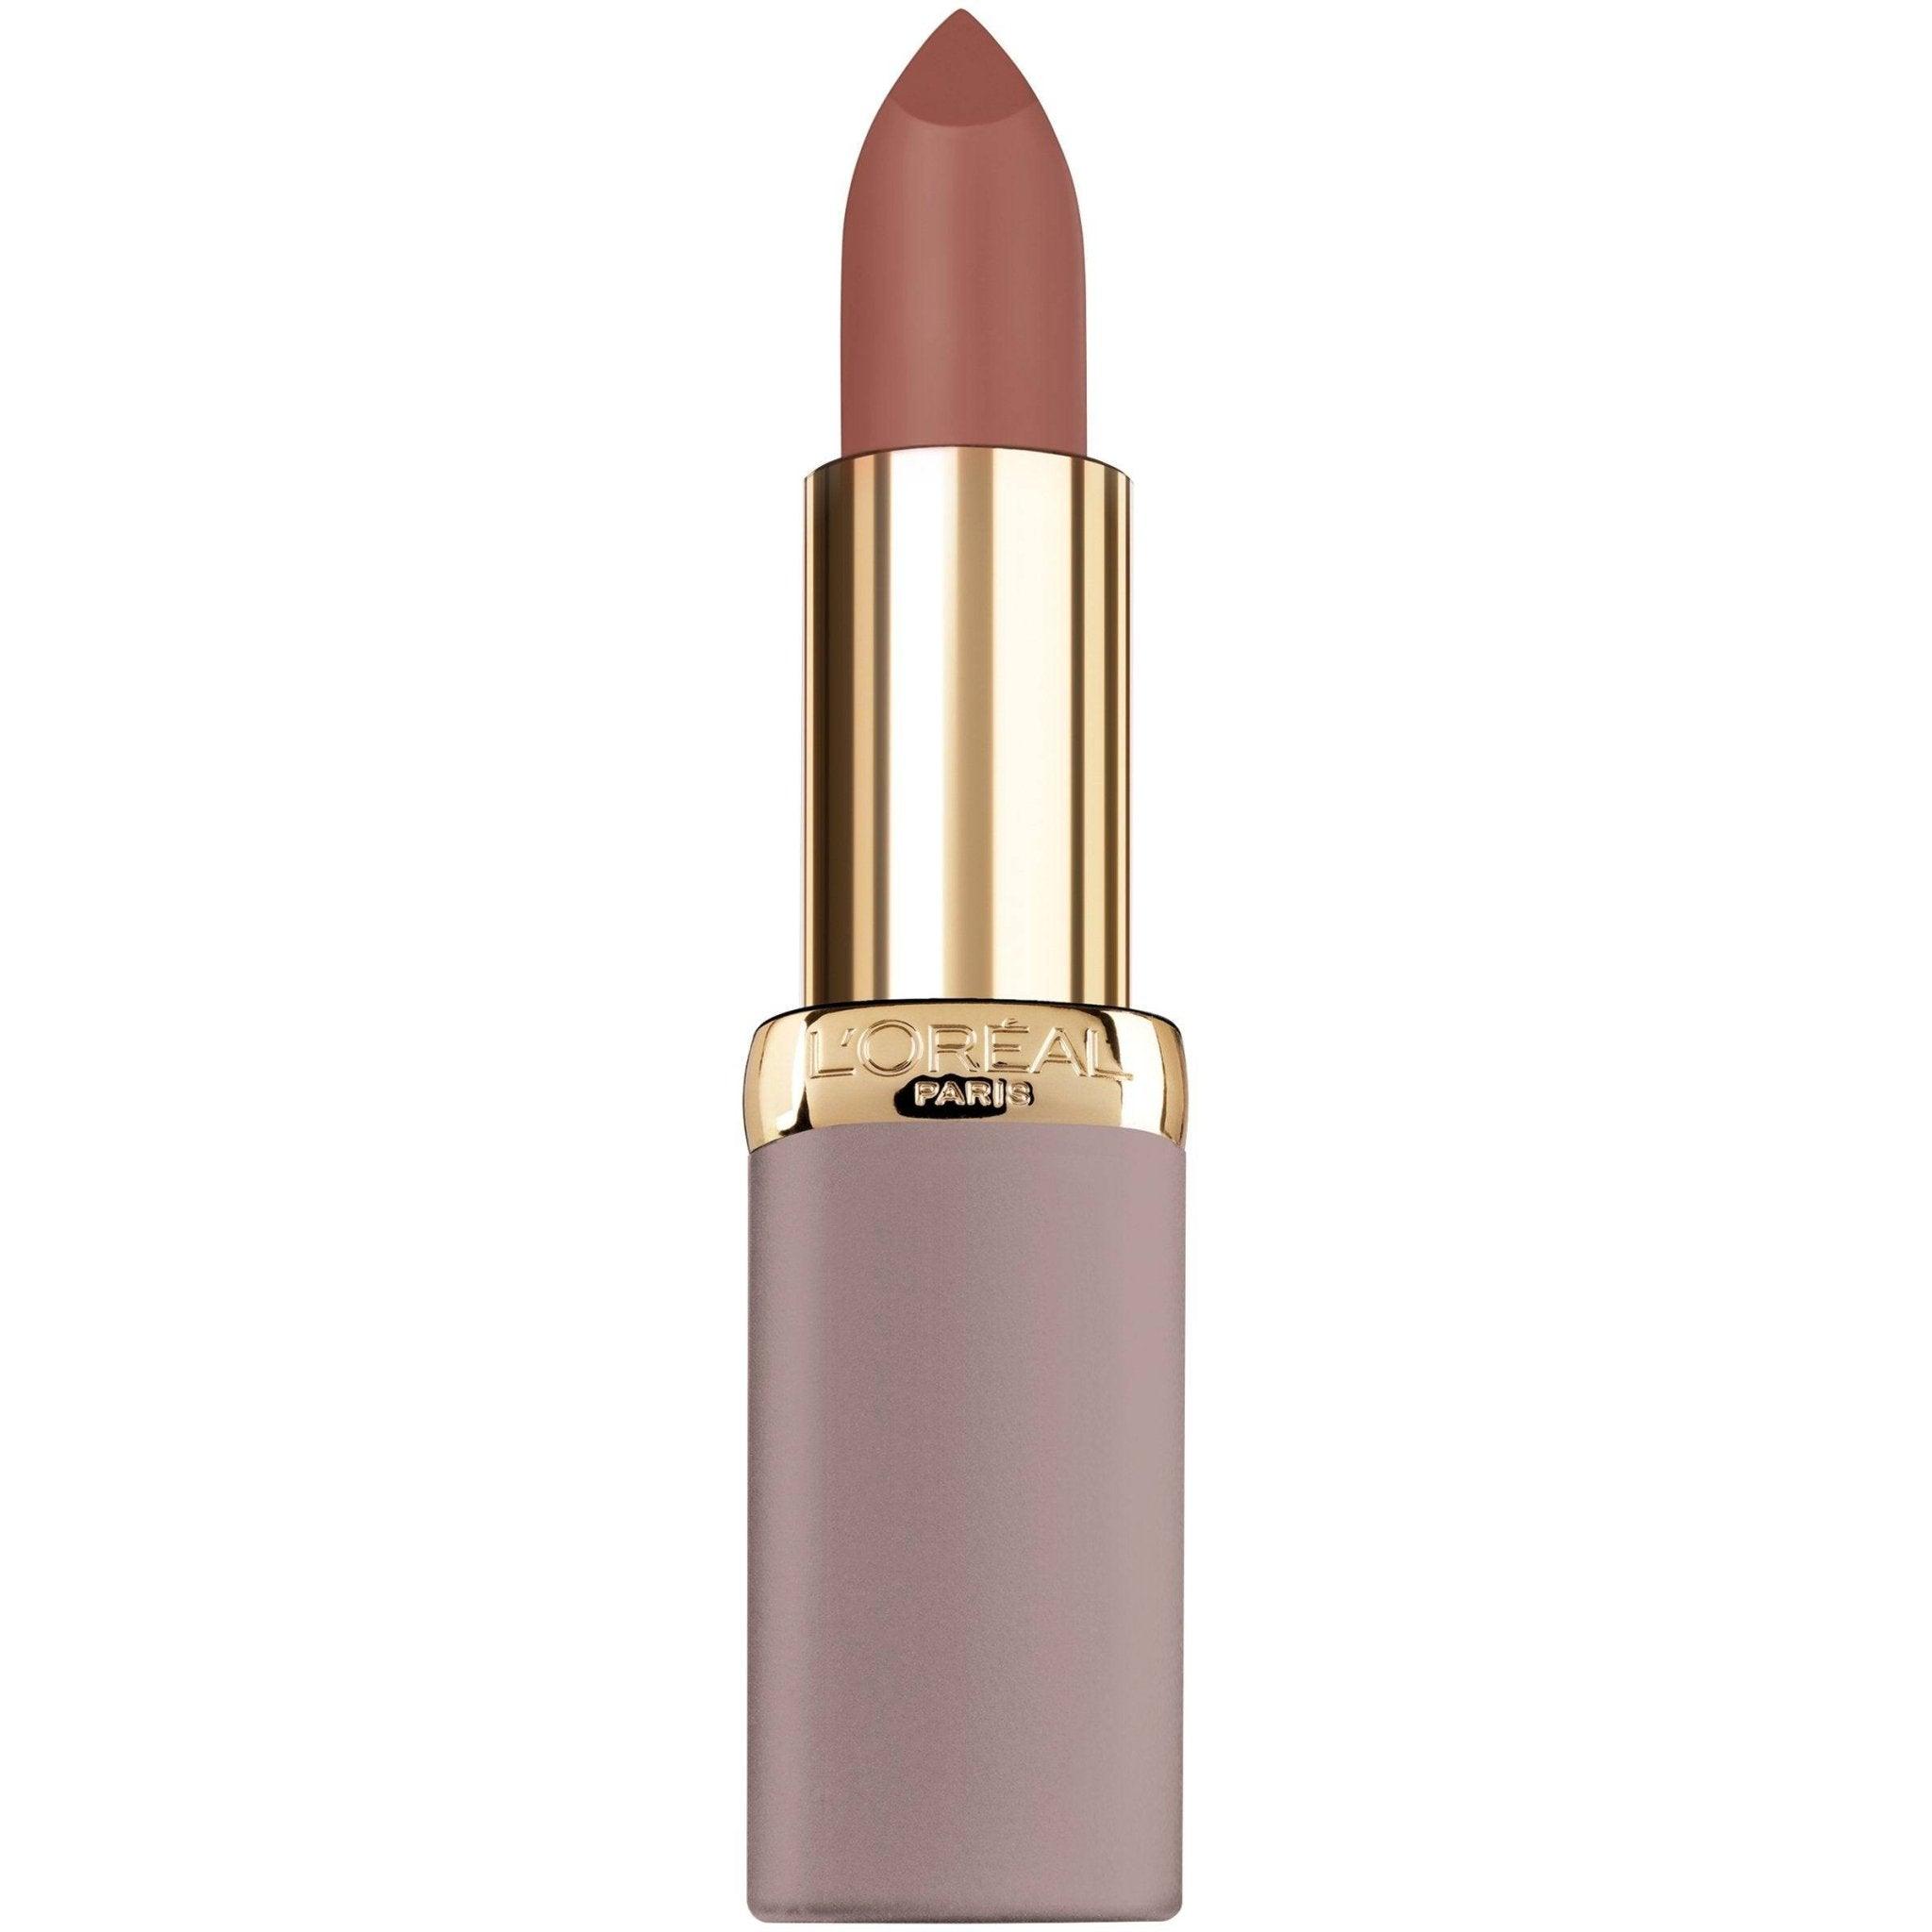 L'Oreal Paris Cosmetics Colour Riche Ultra Matte Highly Pigmented Nude Lipstick, All Out Pout, 0.13 Ounce All Out Pout 0.13 Ounce (Pack of 1) - African Beauty Online